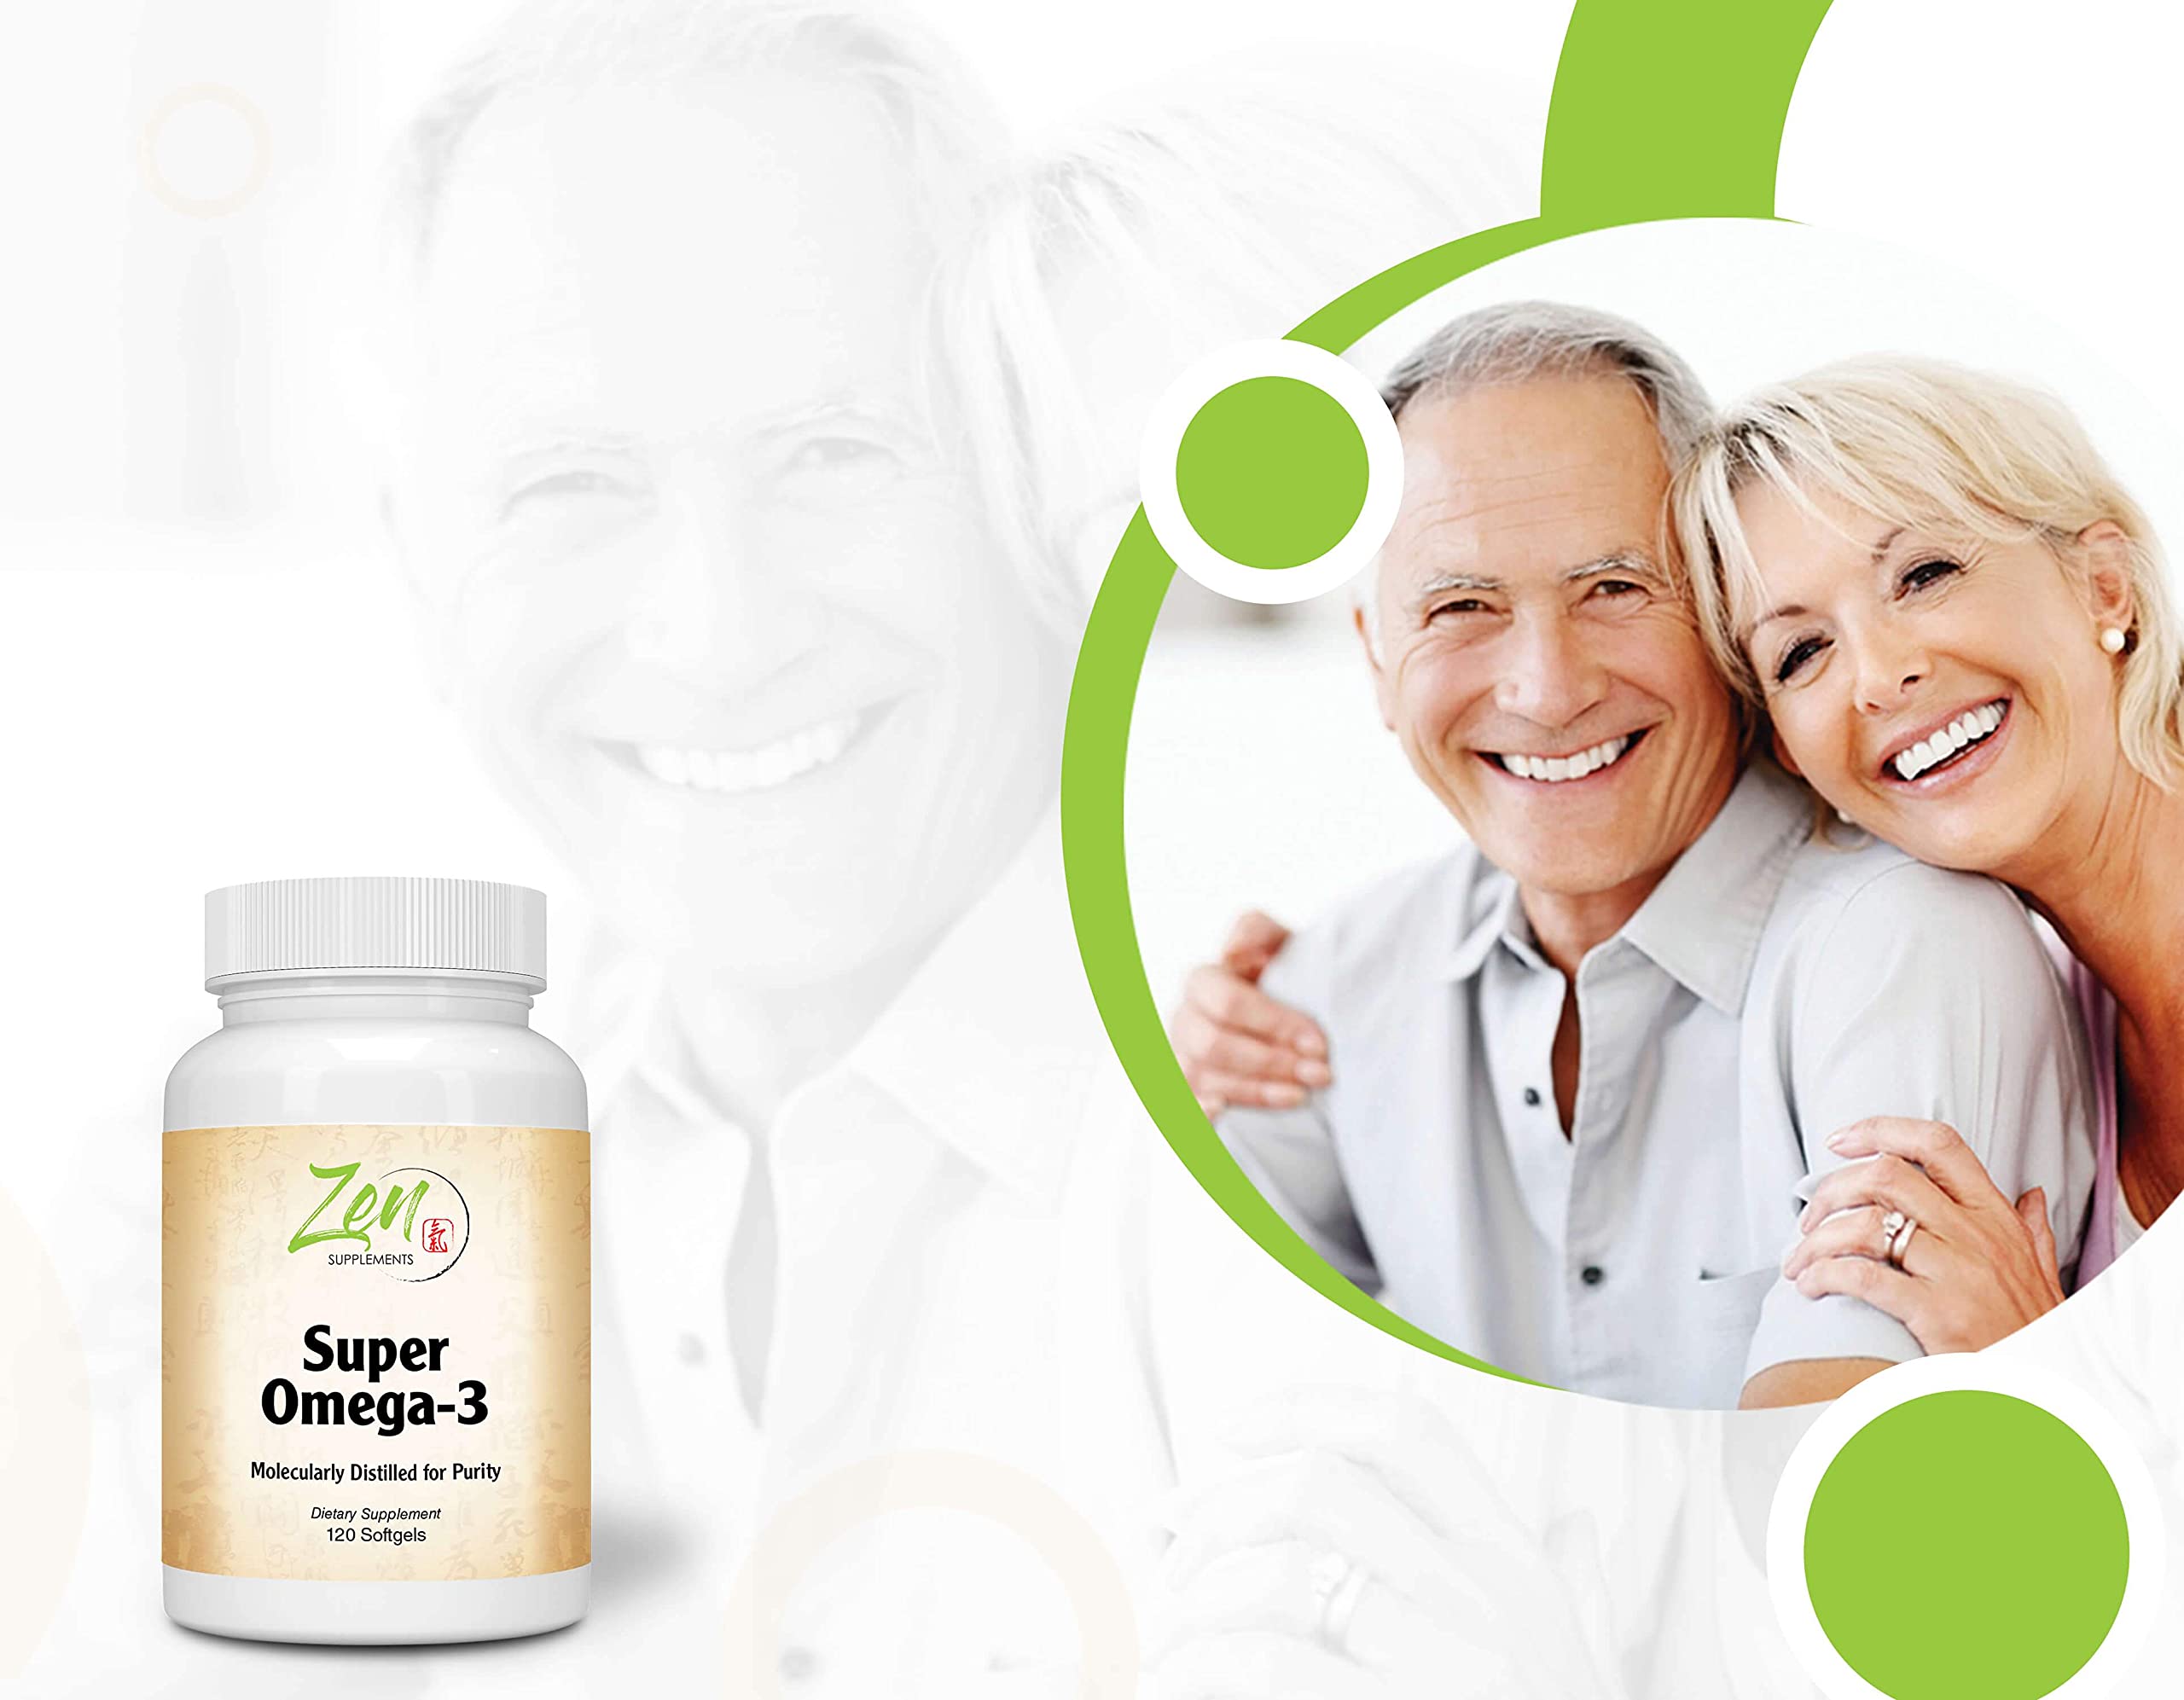 Zen Supplements - Super Omega-3 120-Softgel - Supports Cardiovascular, Joint & Skin Health, Heart Healthy Supplement, Essential Fatty Acids - Contains 300 mg EPA & 200 mg DHA per Capsule